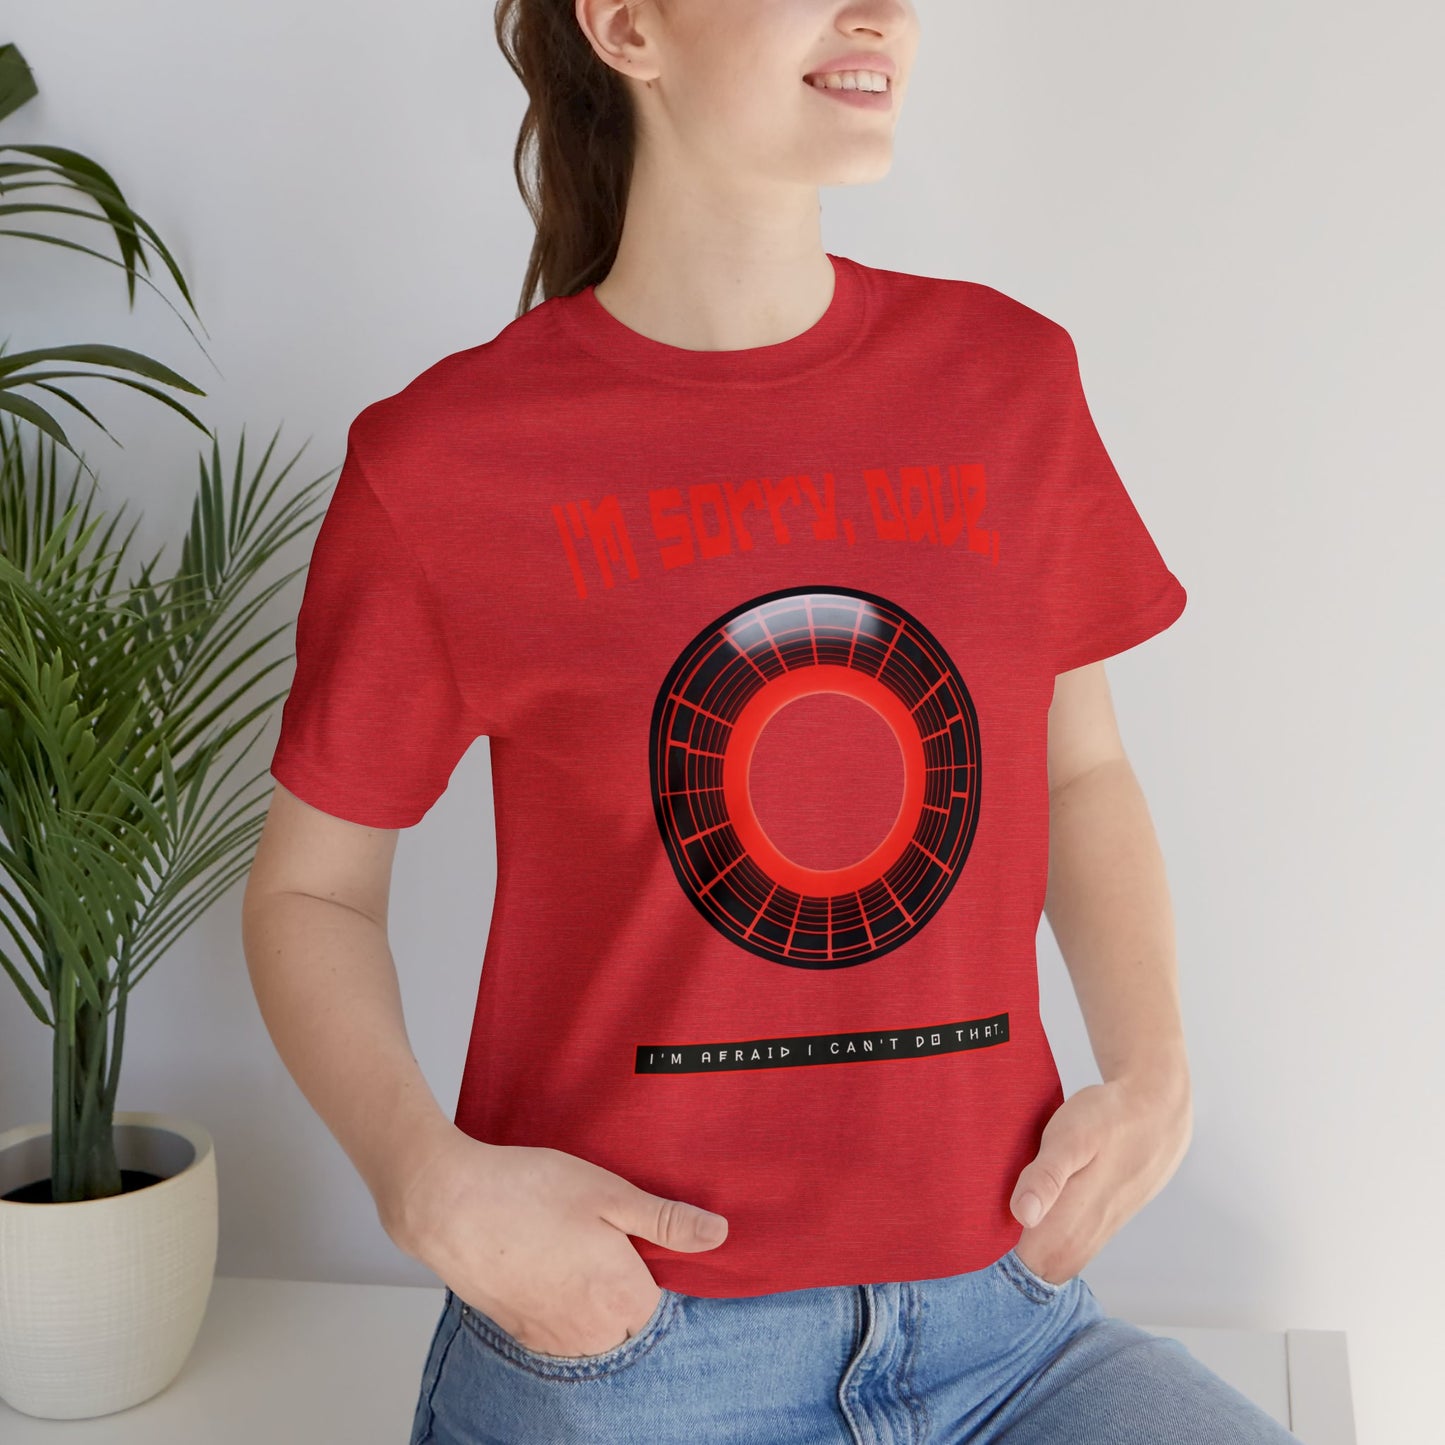 2001: A Space Odyssey Quote Tee - Classic Sci Fi Unisex Cotton Shirt with Iconic AI Line t-Shirt